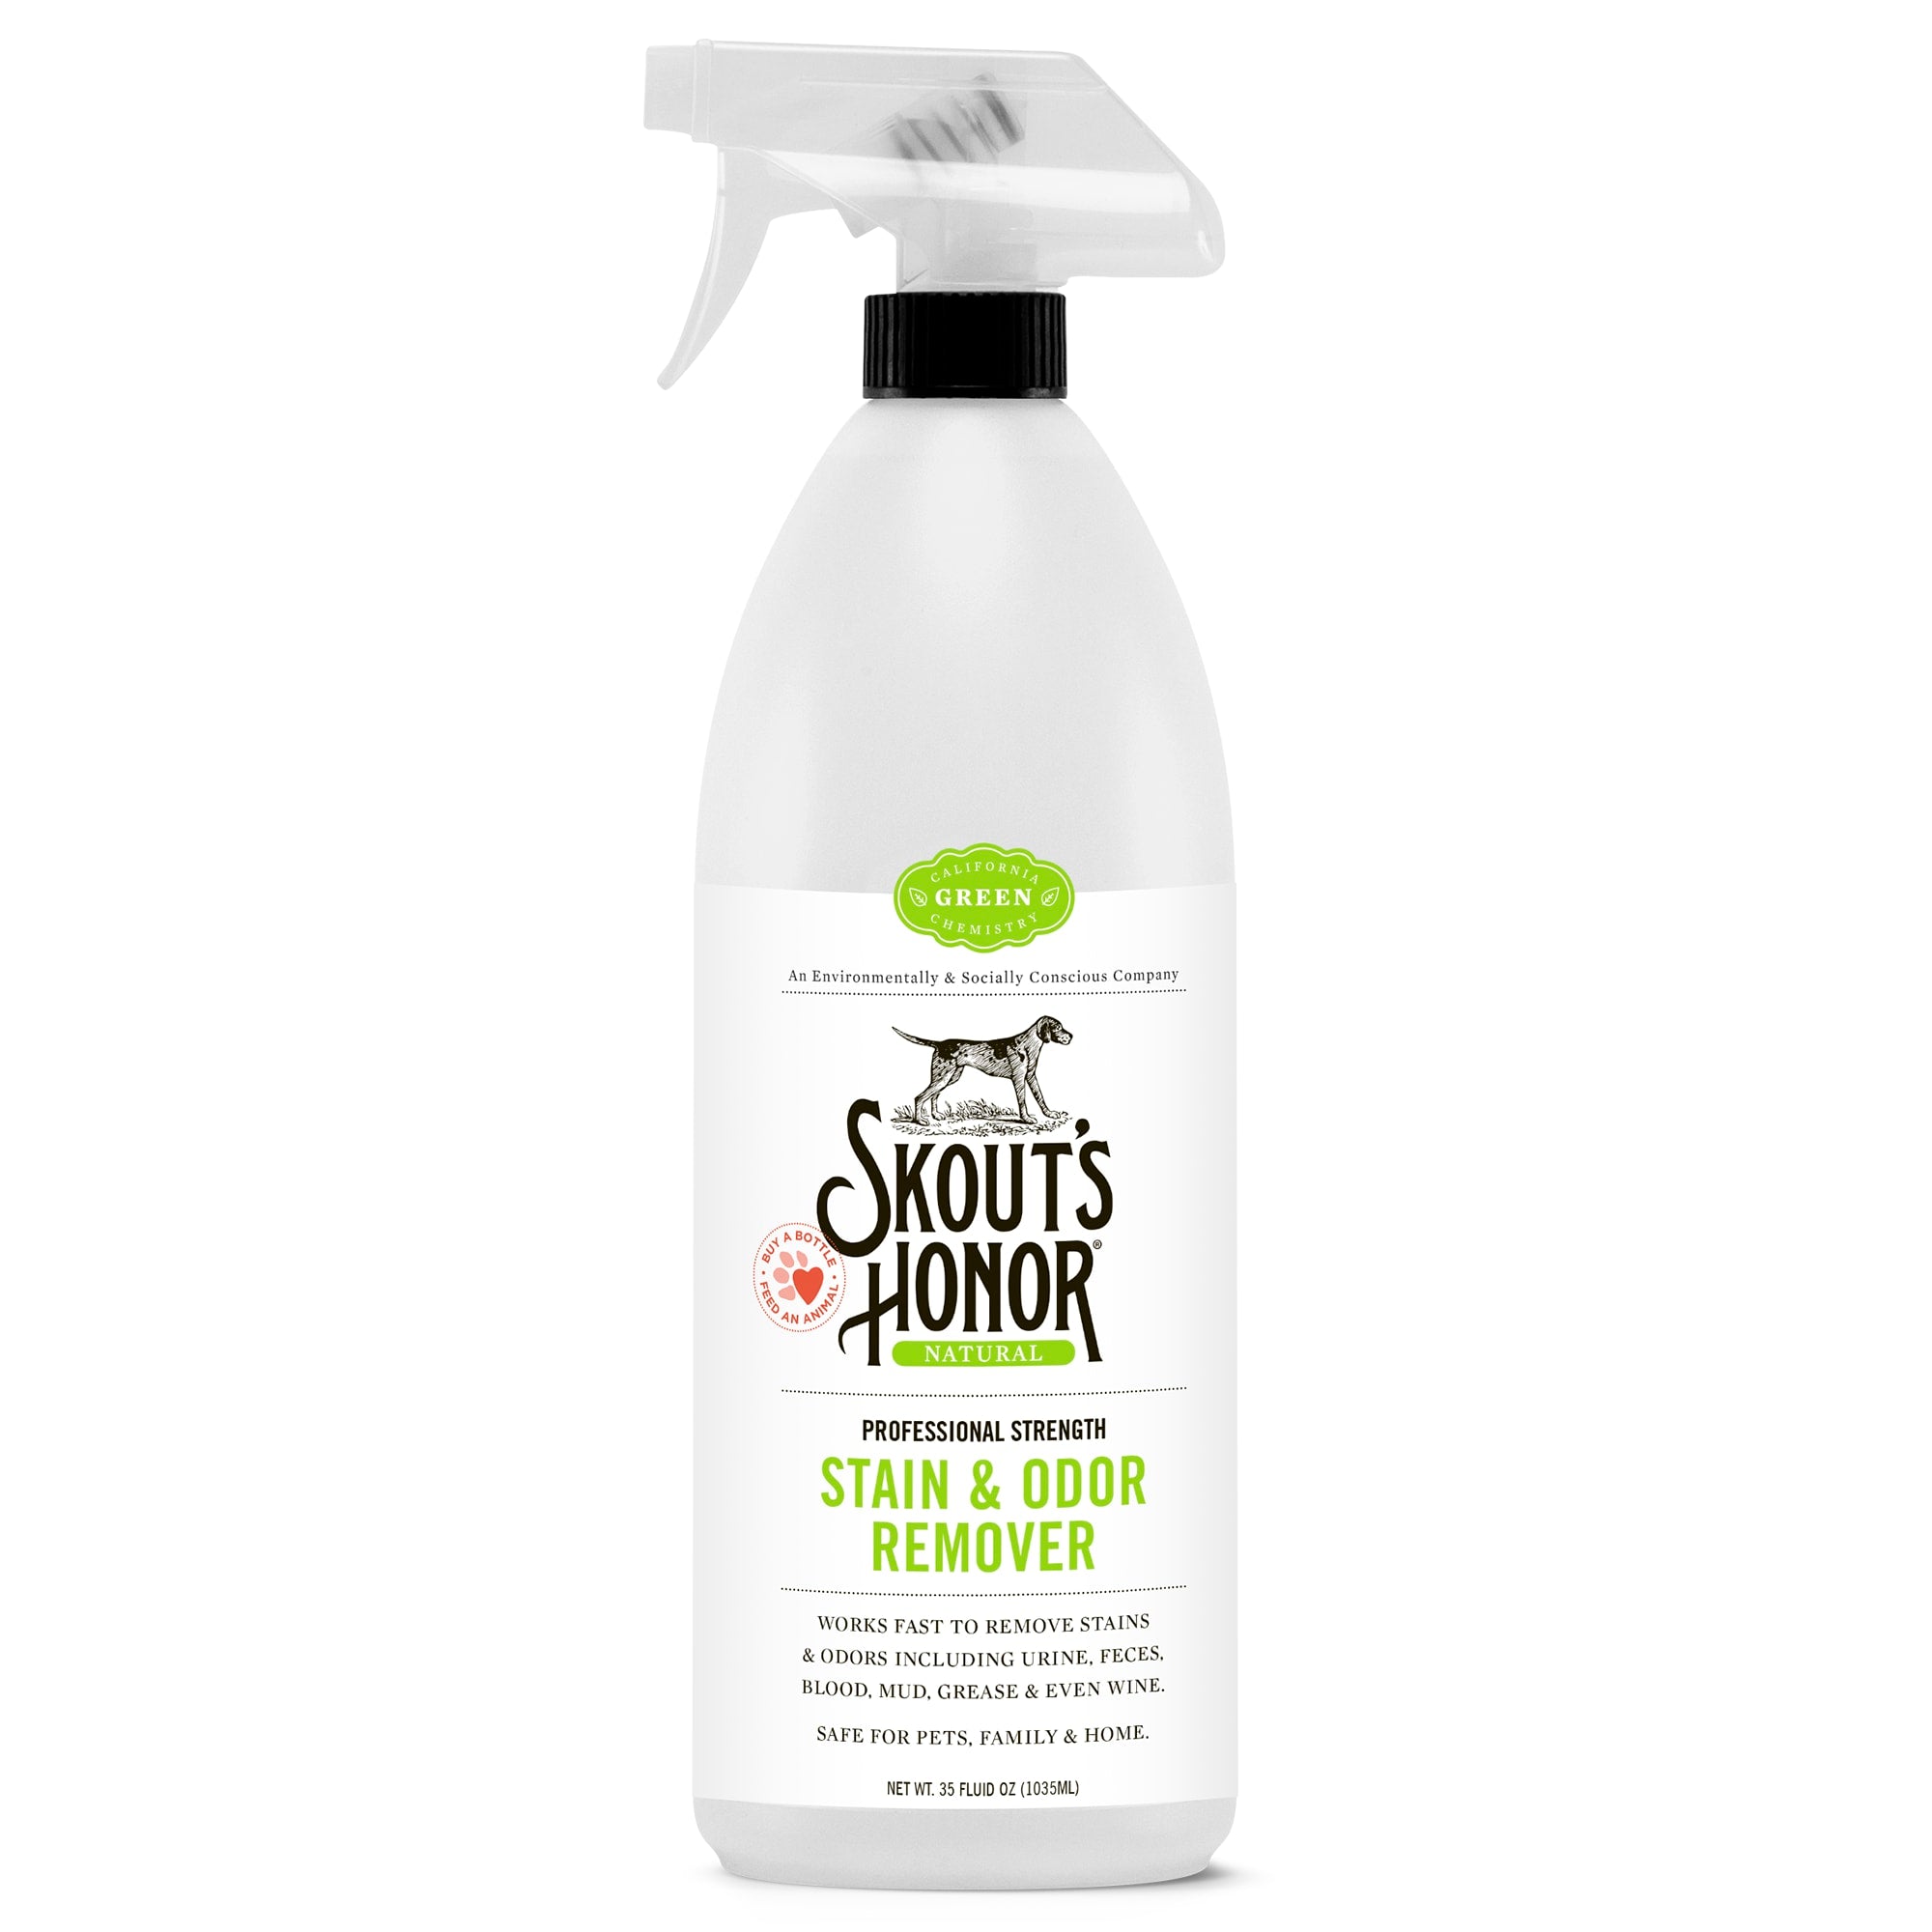 Professional Strength Stain & Odor Remover